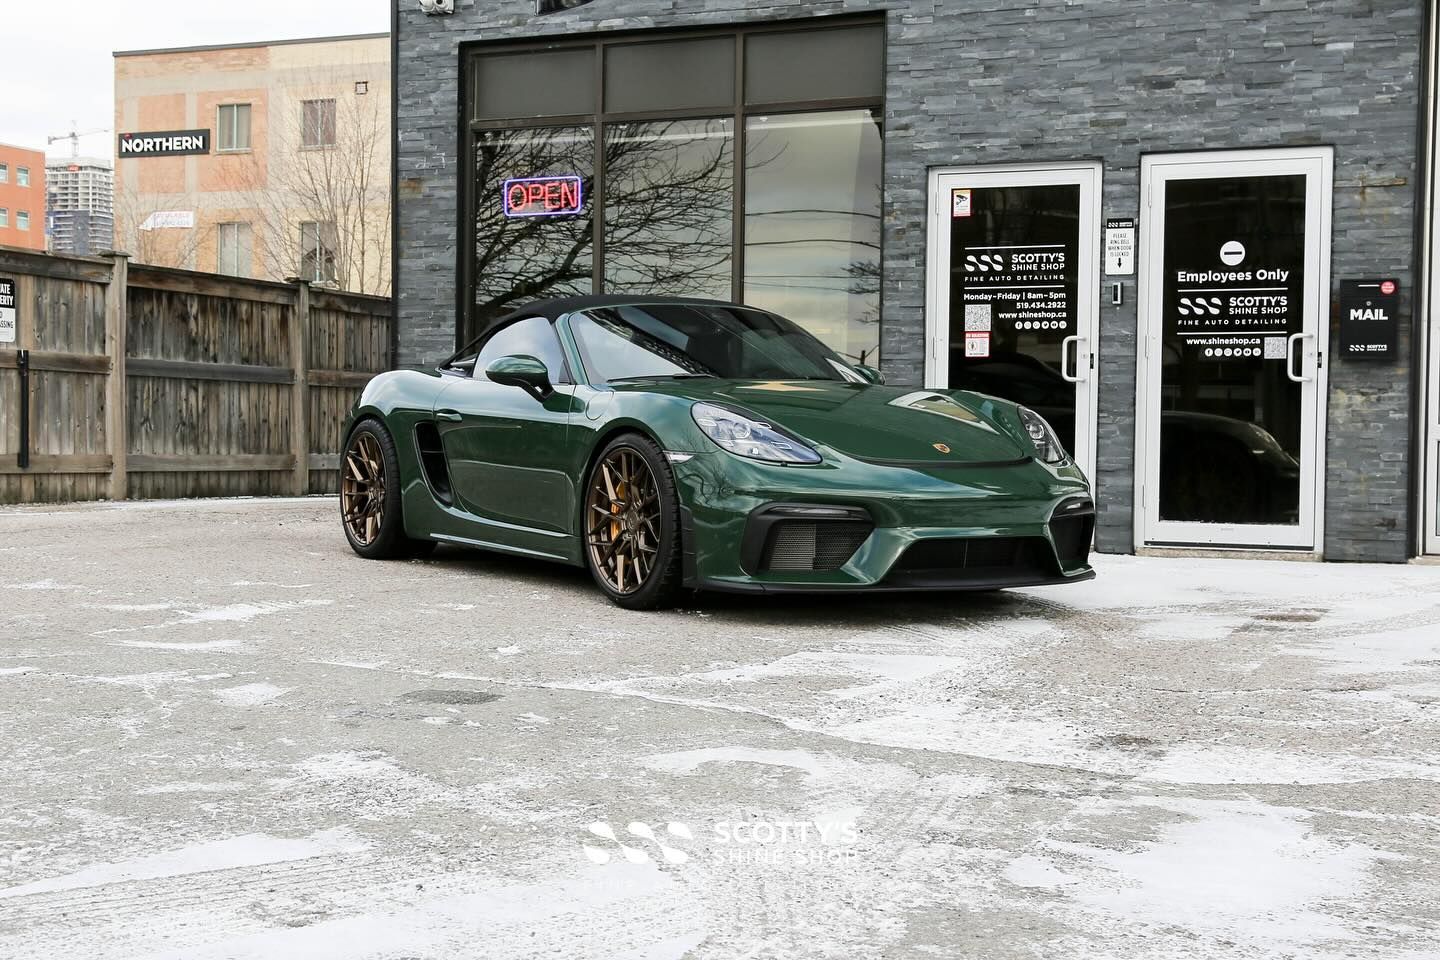 2021 Porsche 718 Spyder in British Racing Green! This beauty got it all! Full body coverage in Xpel 